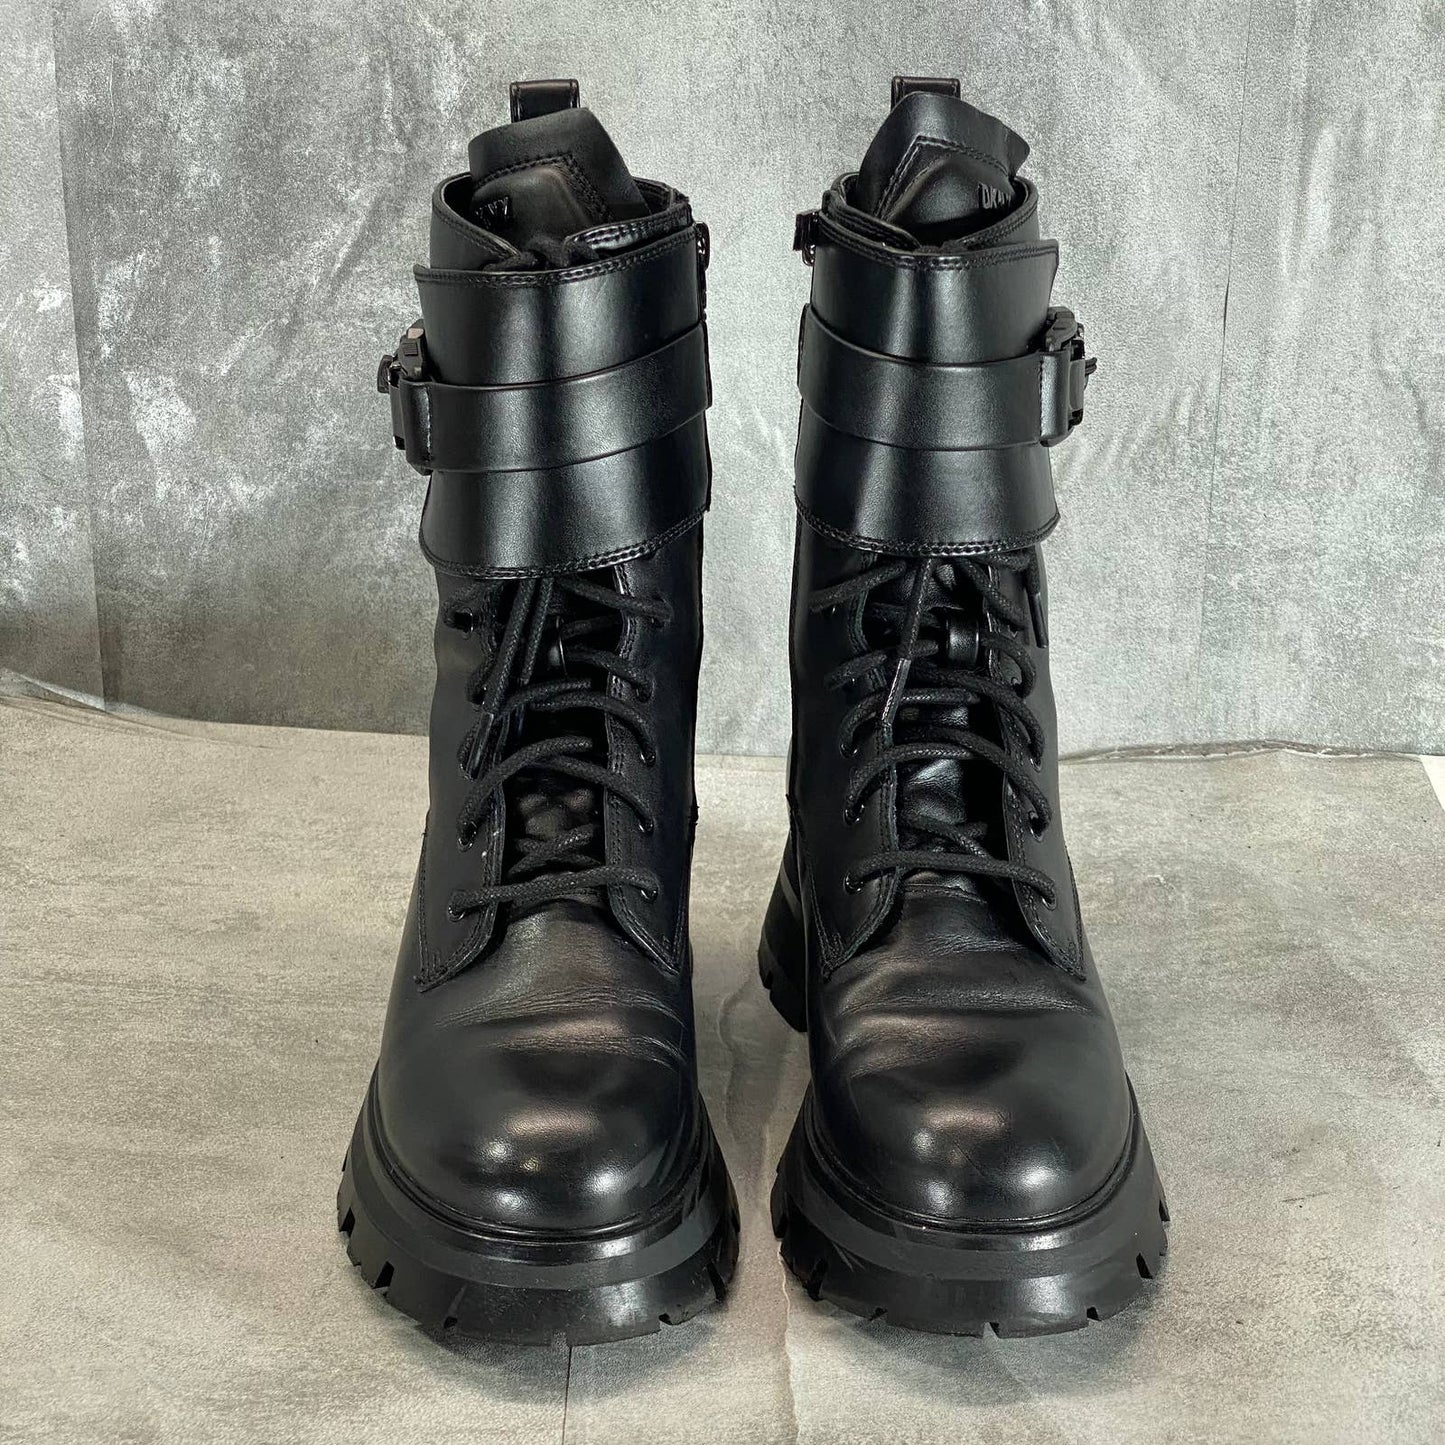 DKNY Women's Black Smooth Sava Buckled Combat Lace-Up Lug-Sole Boots SZ 8